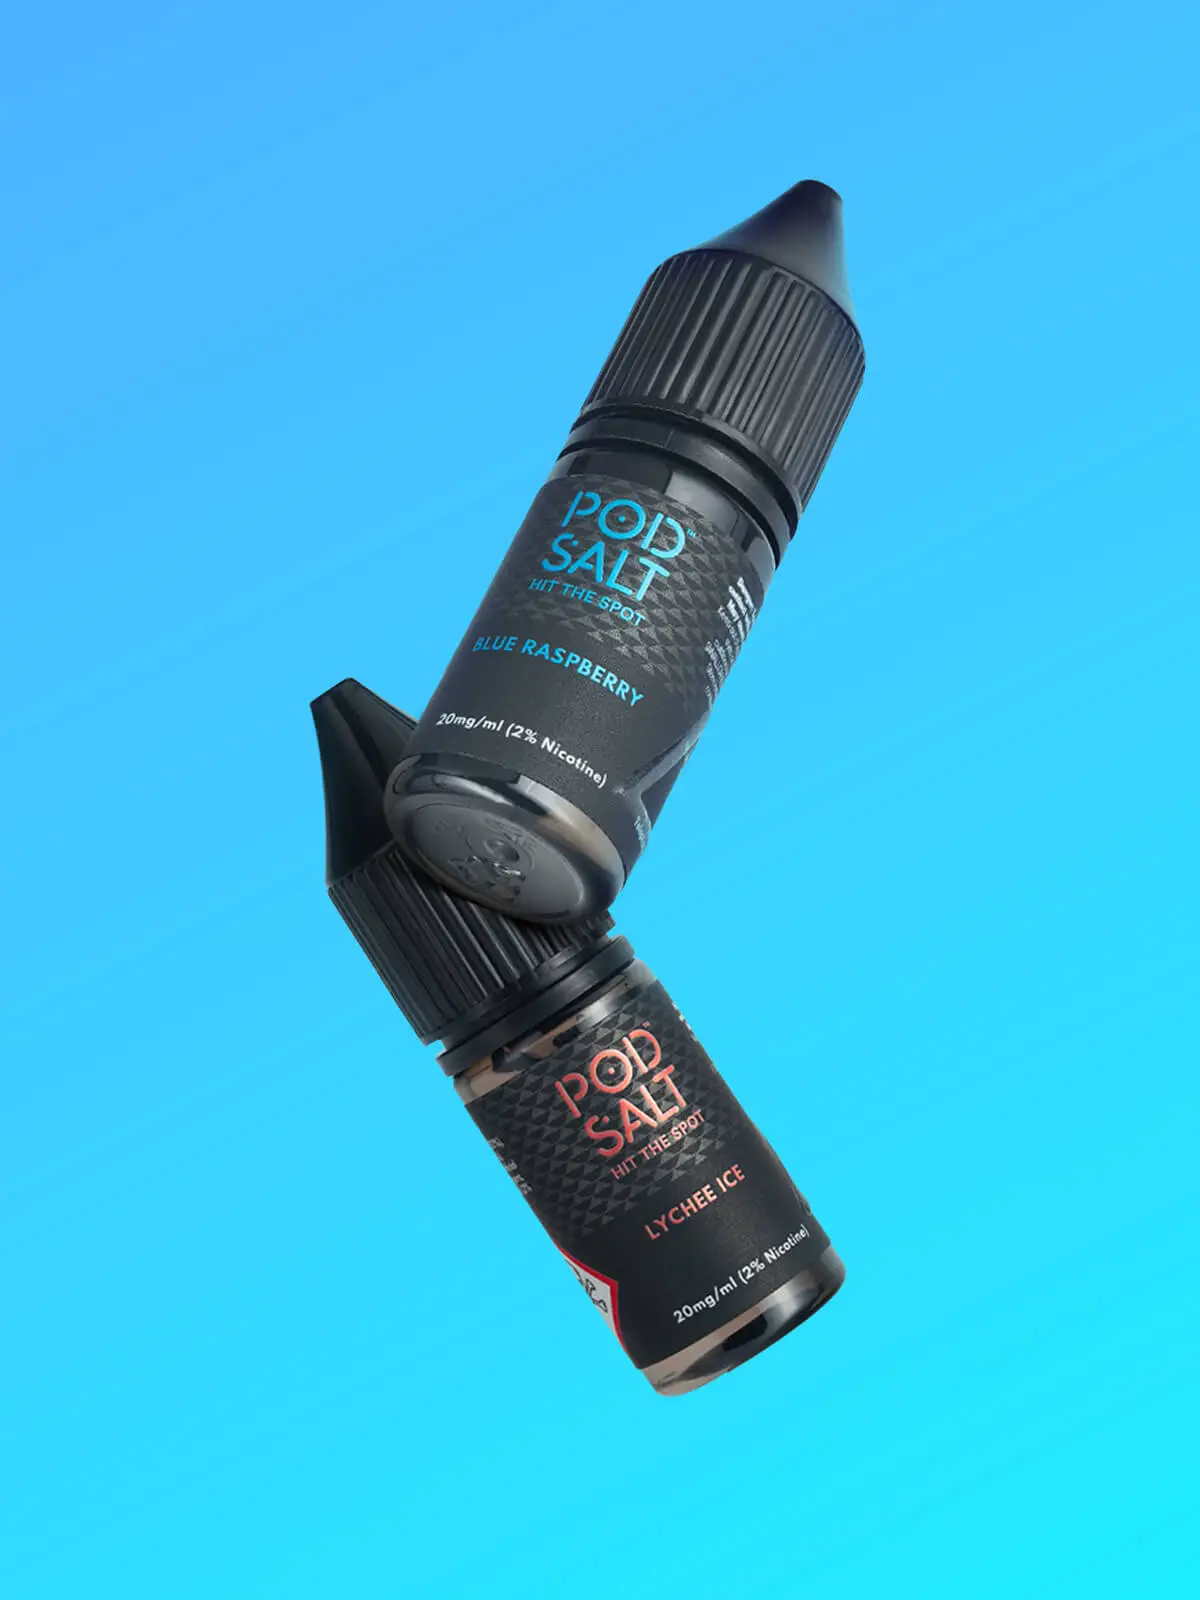 Two Pod Salt Core bottles of e-liquid in front of a blue background